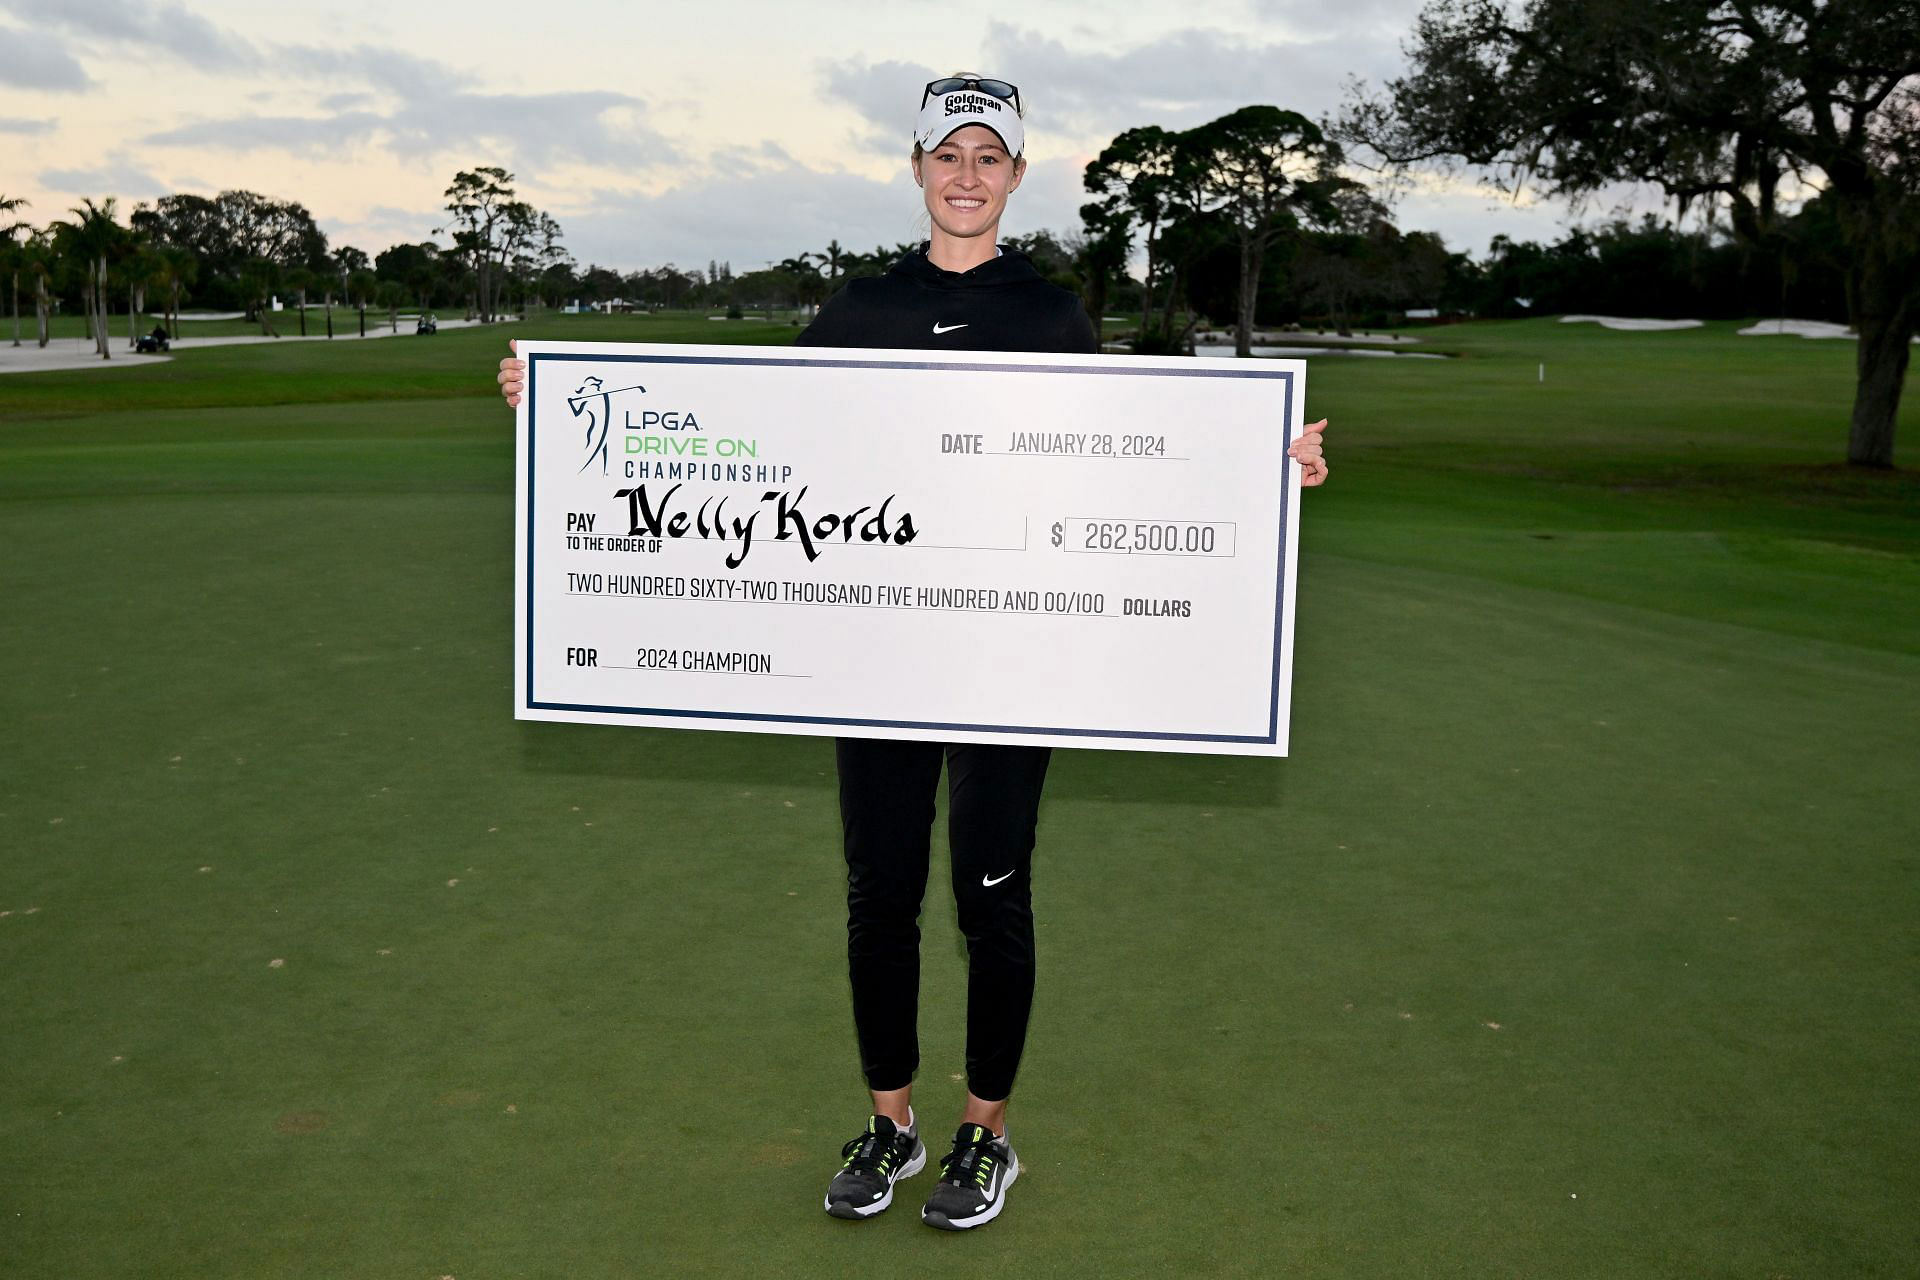 How much did Nelly Korda win at the 2024 LPGA Drive On Championship